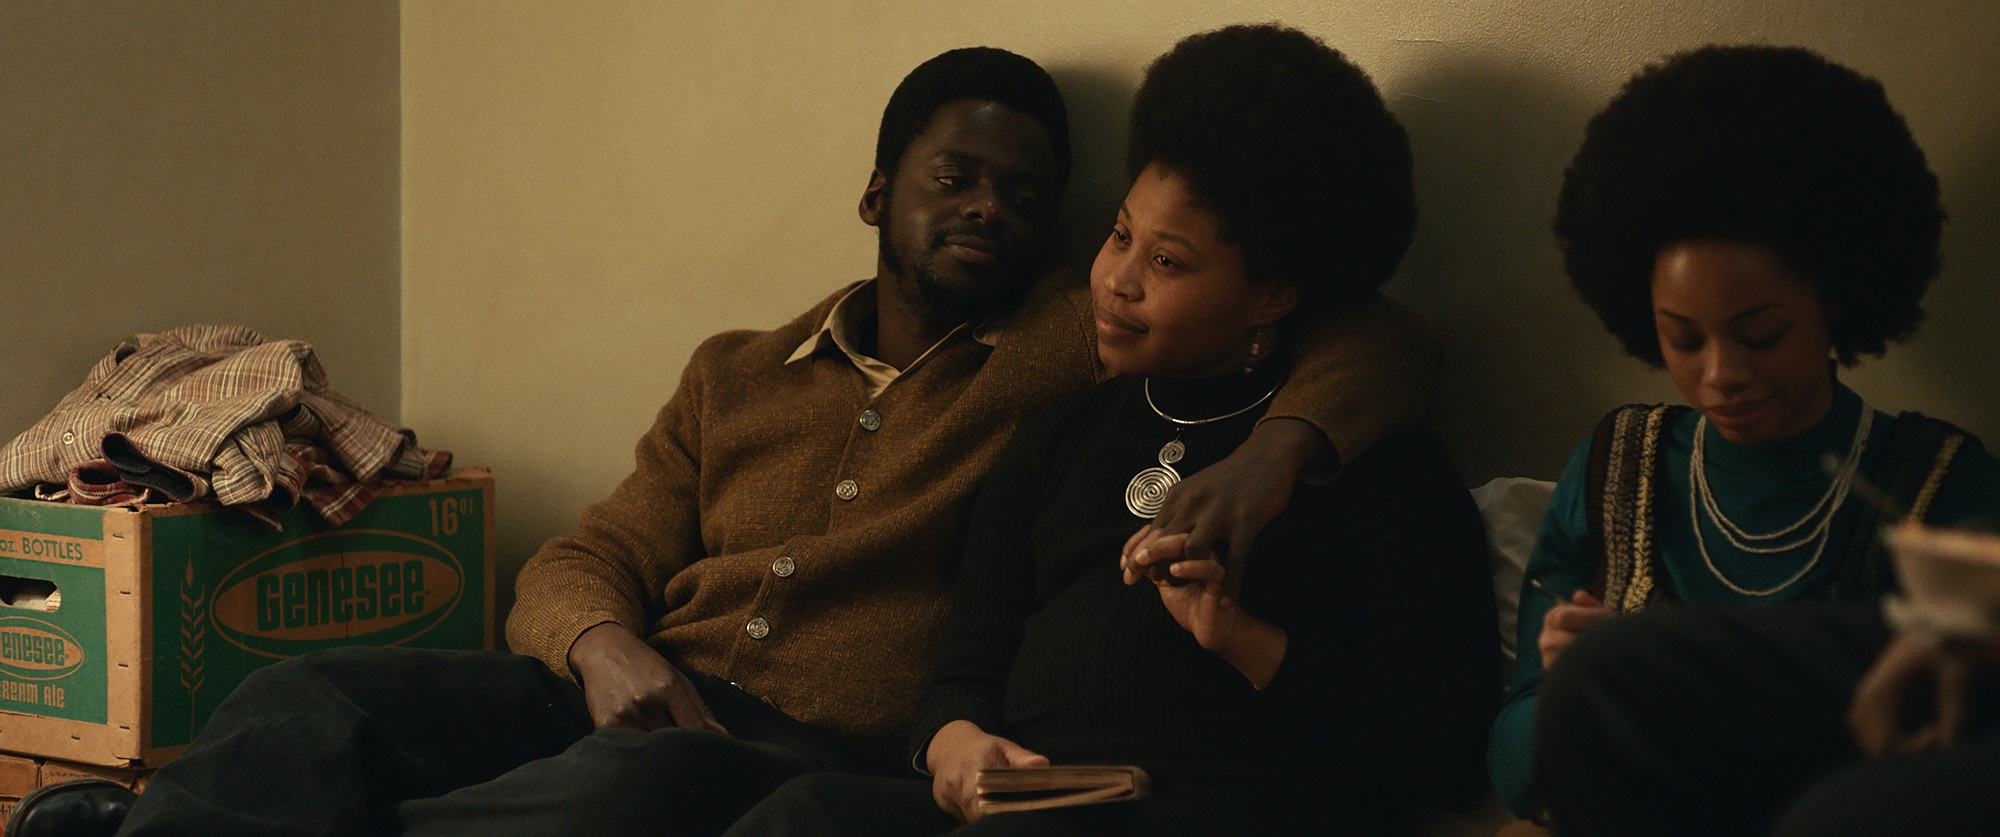 Daniel Kaluuya and Dominique Fishback in Judas and the Black Messiah